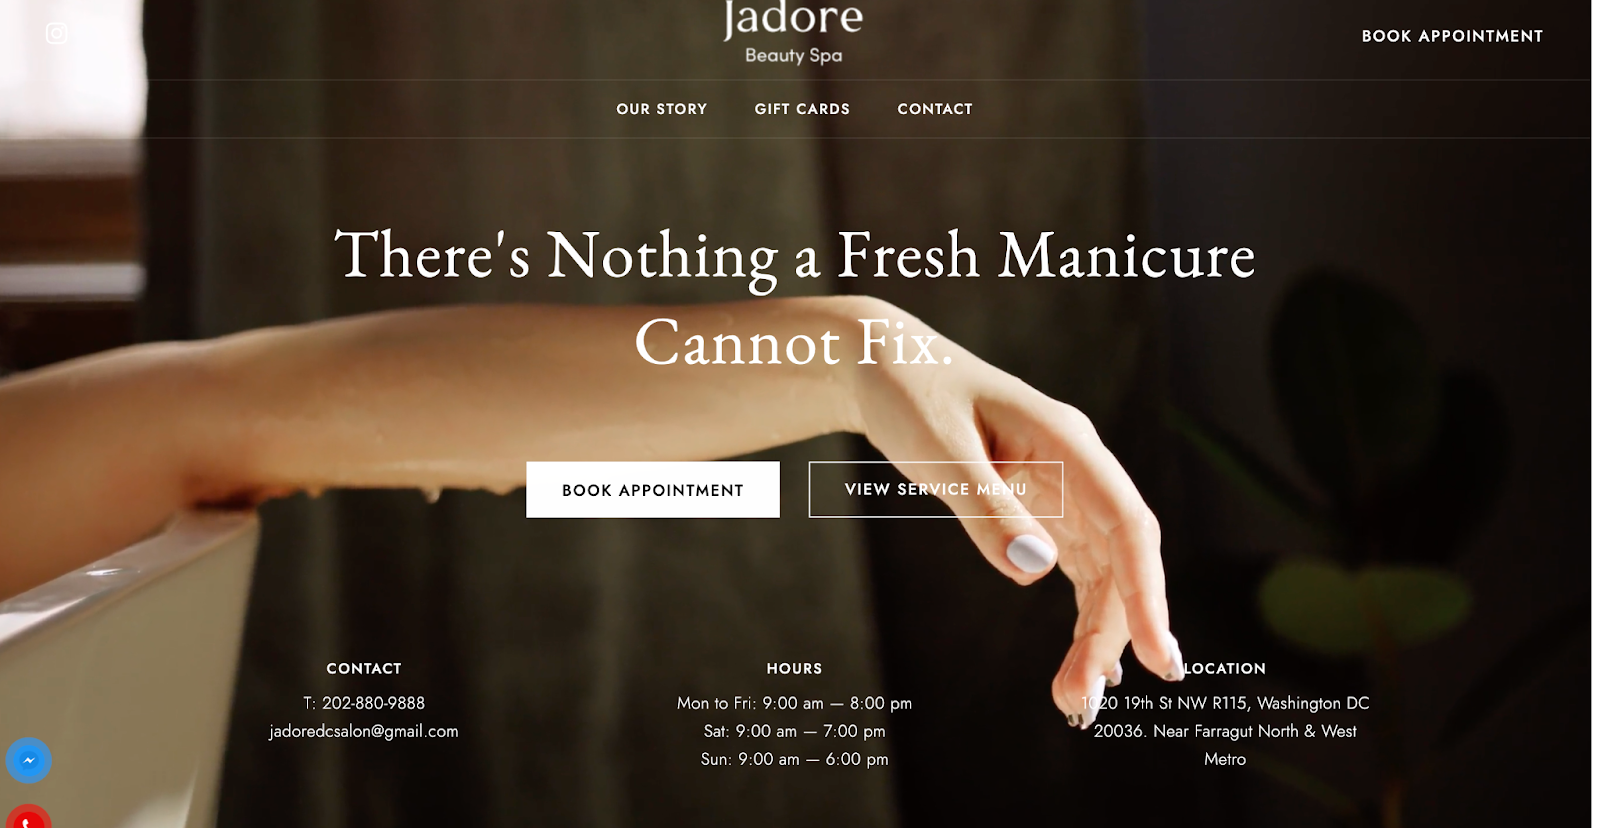 Best nail salon websites, example from Jadore Beauty Spa.